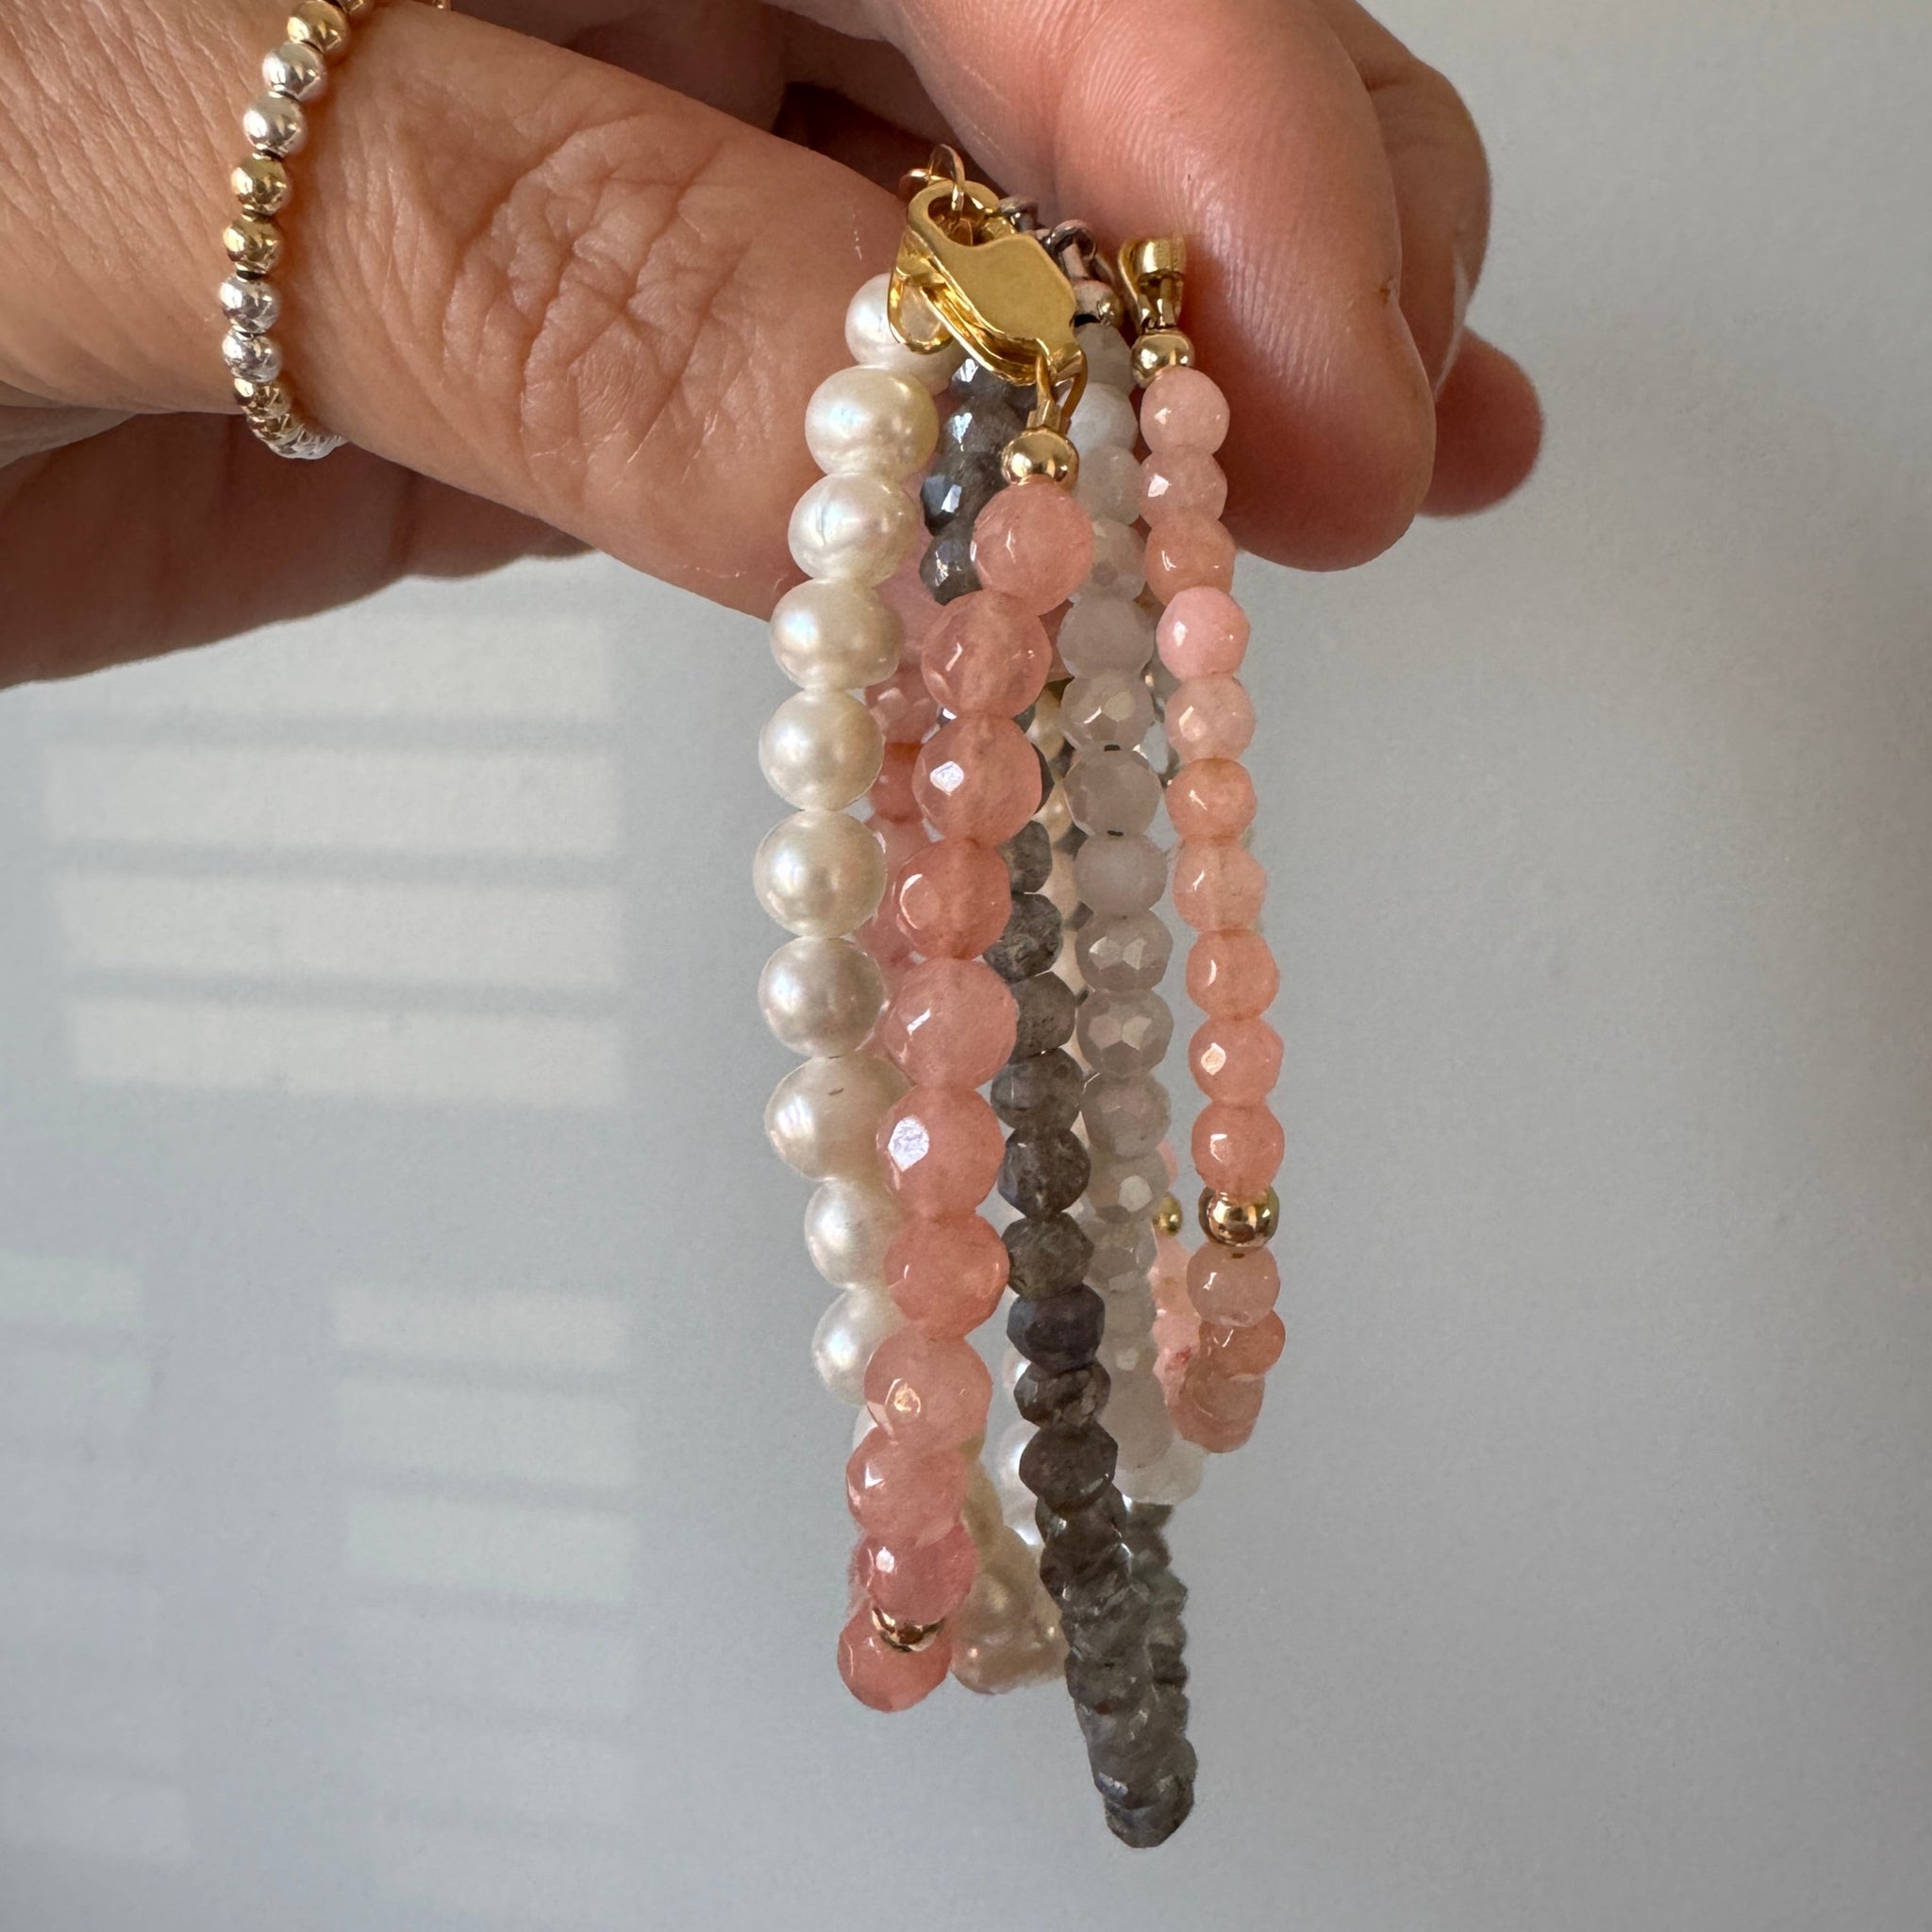 Pale Pink Natural Coral Mama and Mini Bracelets - Set or Each